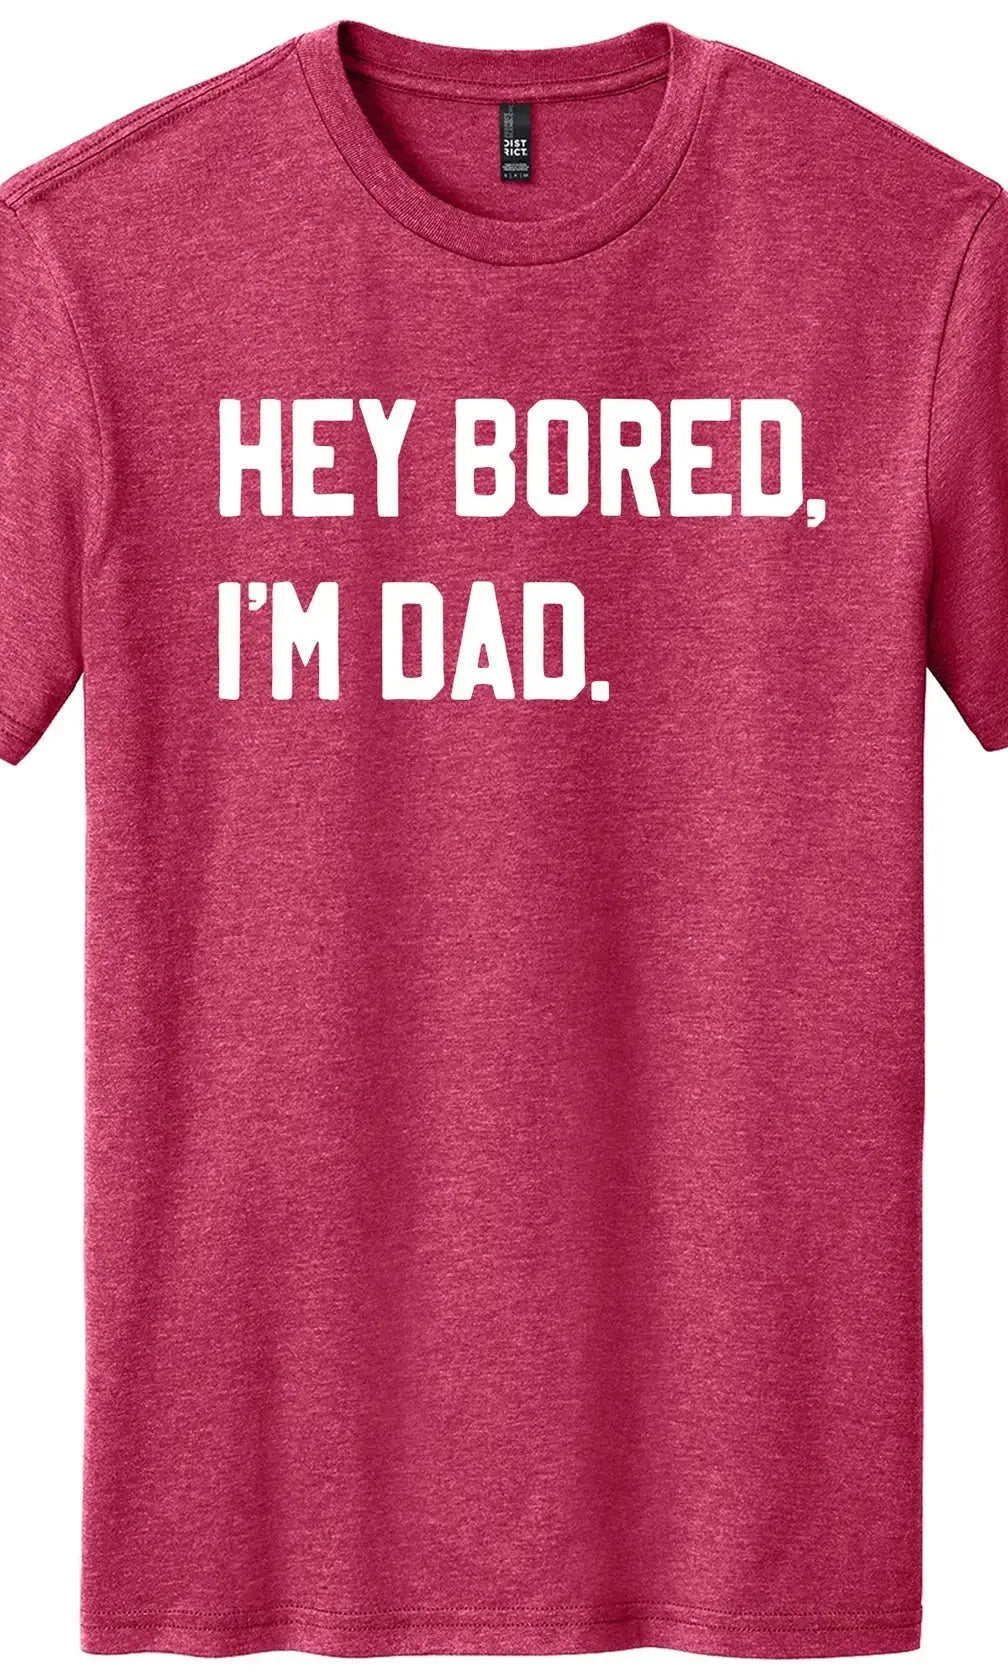 PREORDER: Hey Bored, I'm Dad Graphic Tee Ave Shops